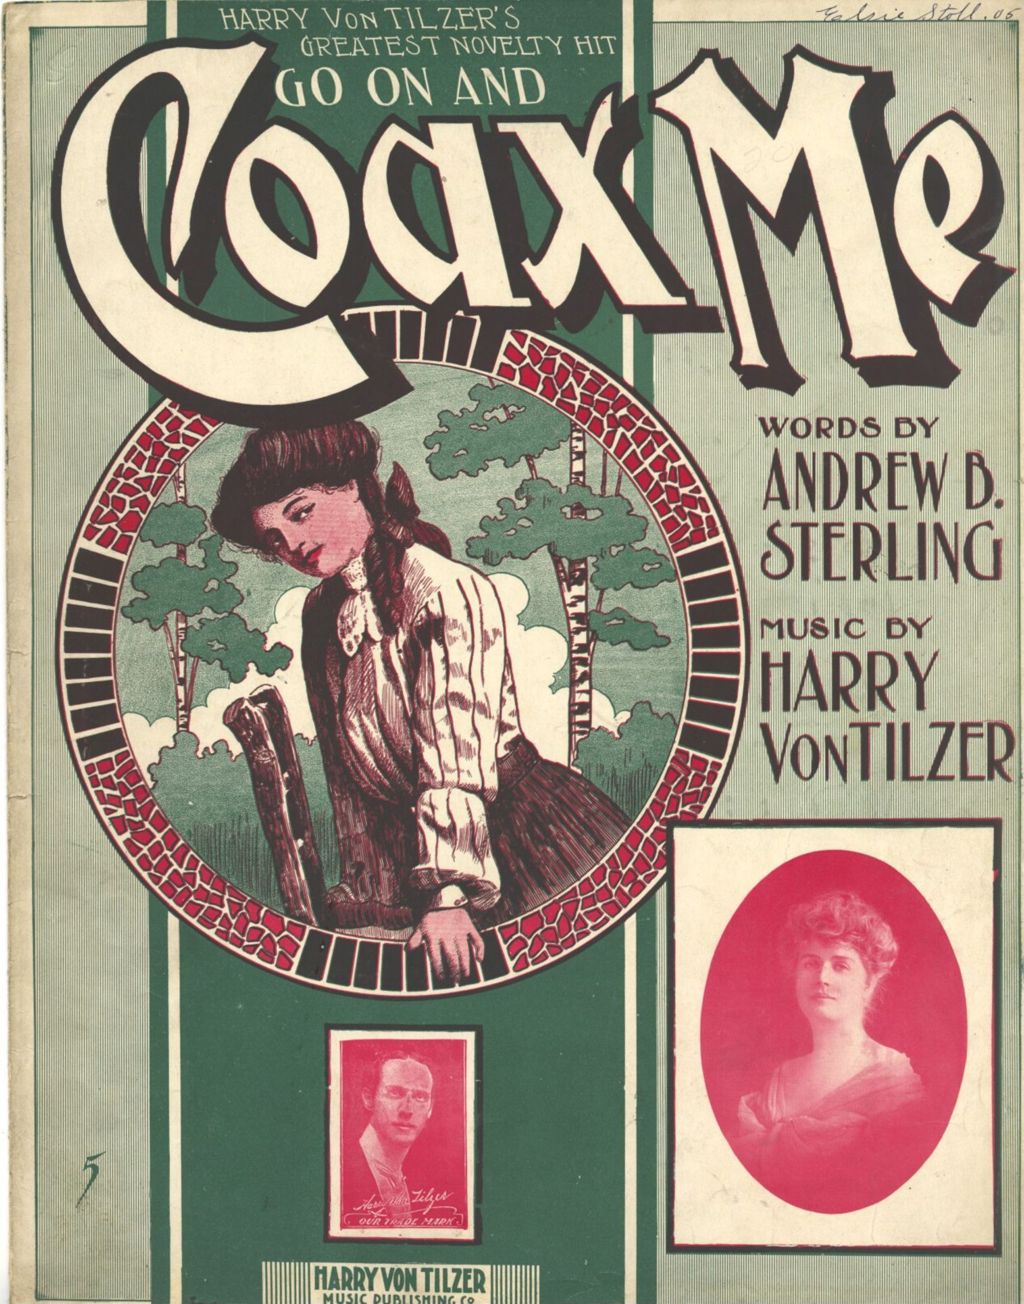 Miniature of (Go On And) Coax Me